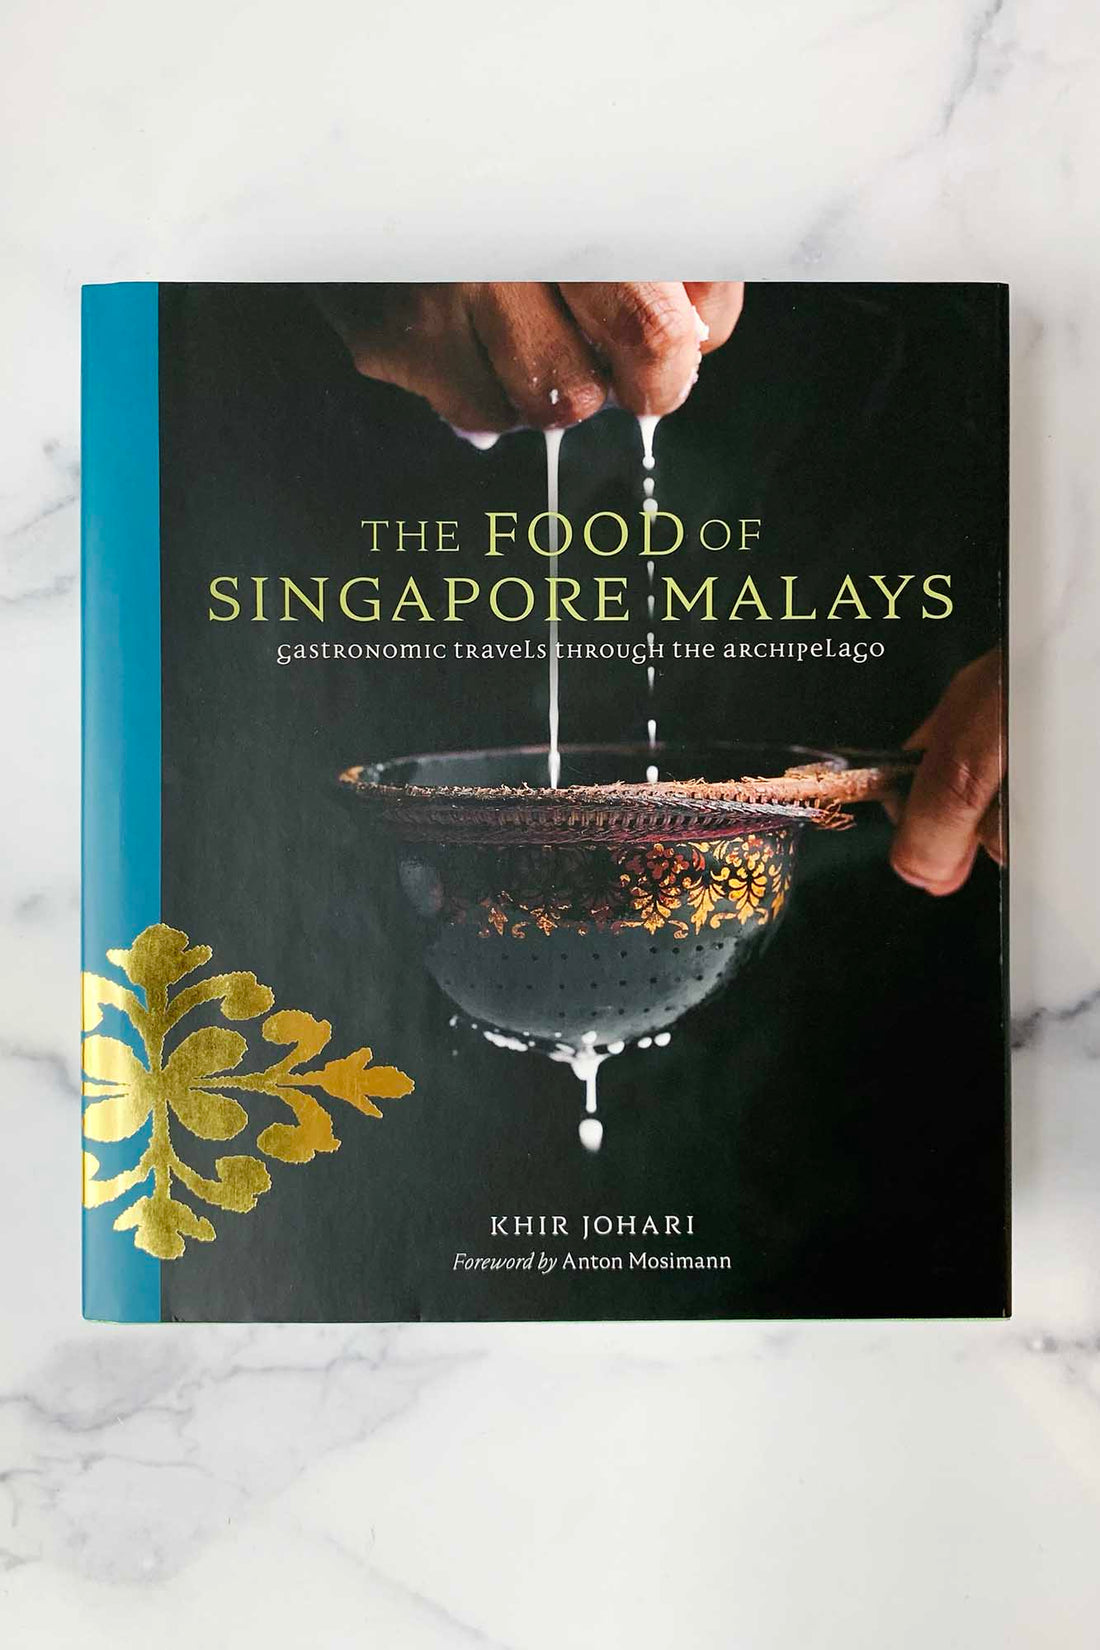 The Food of the Singapore Malays